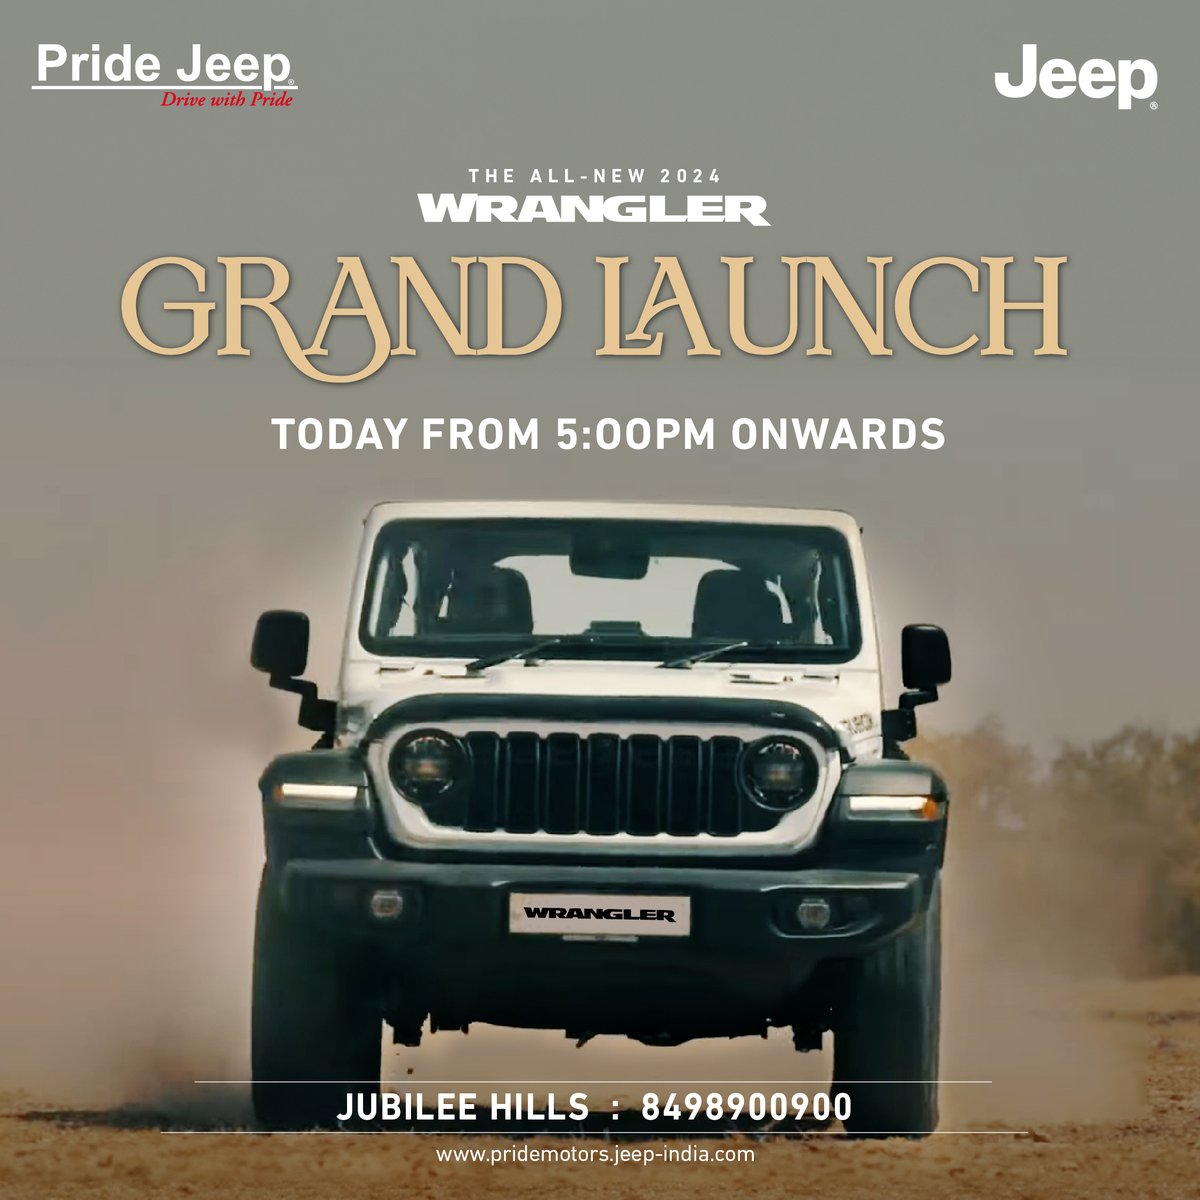 The all-new 2024 Wrangler, with its innovative mechanisms, is here to lead the journey of innovation and sophistication.  

#Pridejeep #PrideJeepHyderabad #jeepcars #jeeplife #jeepindia #suv #suvcars #jeepsuv #offroader #offroadvehicle #offroadcar #jeepoffroad #jeepwrangler